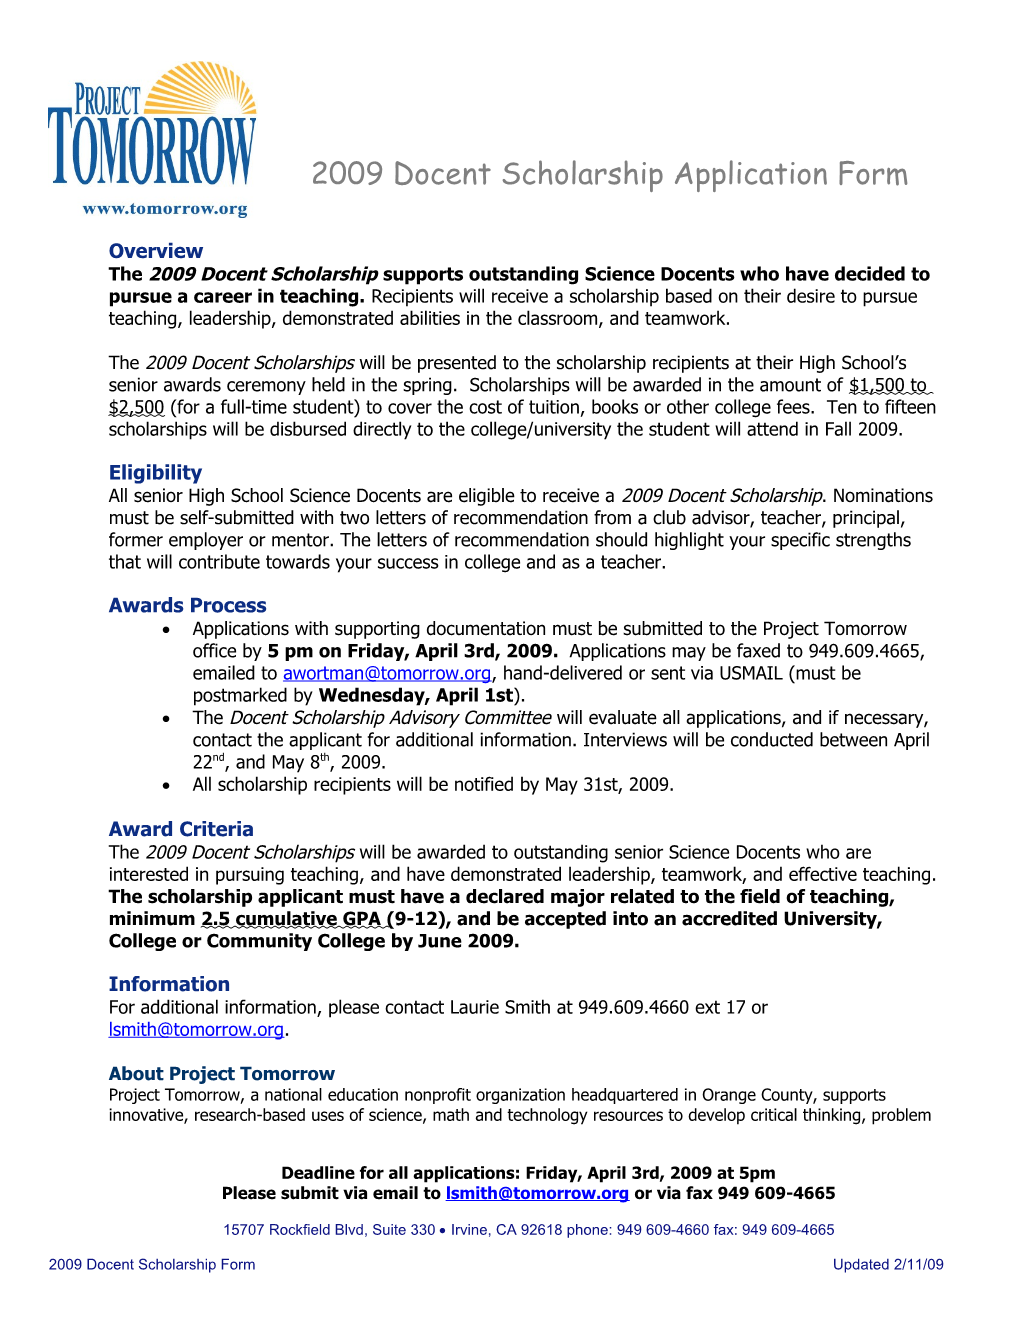 The 2009 Docent Scholarships Will Be Presented to the Scholarship Recipients at Their High